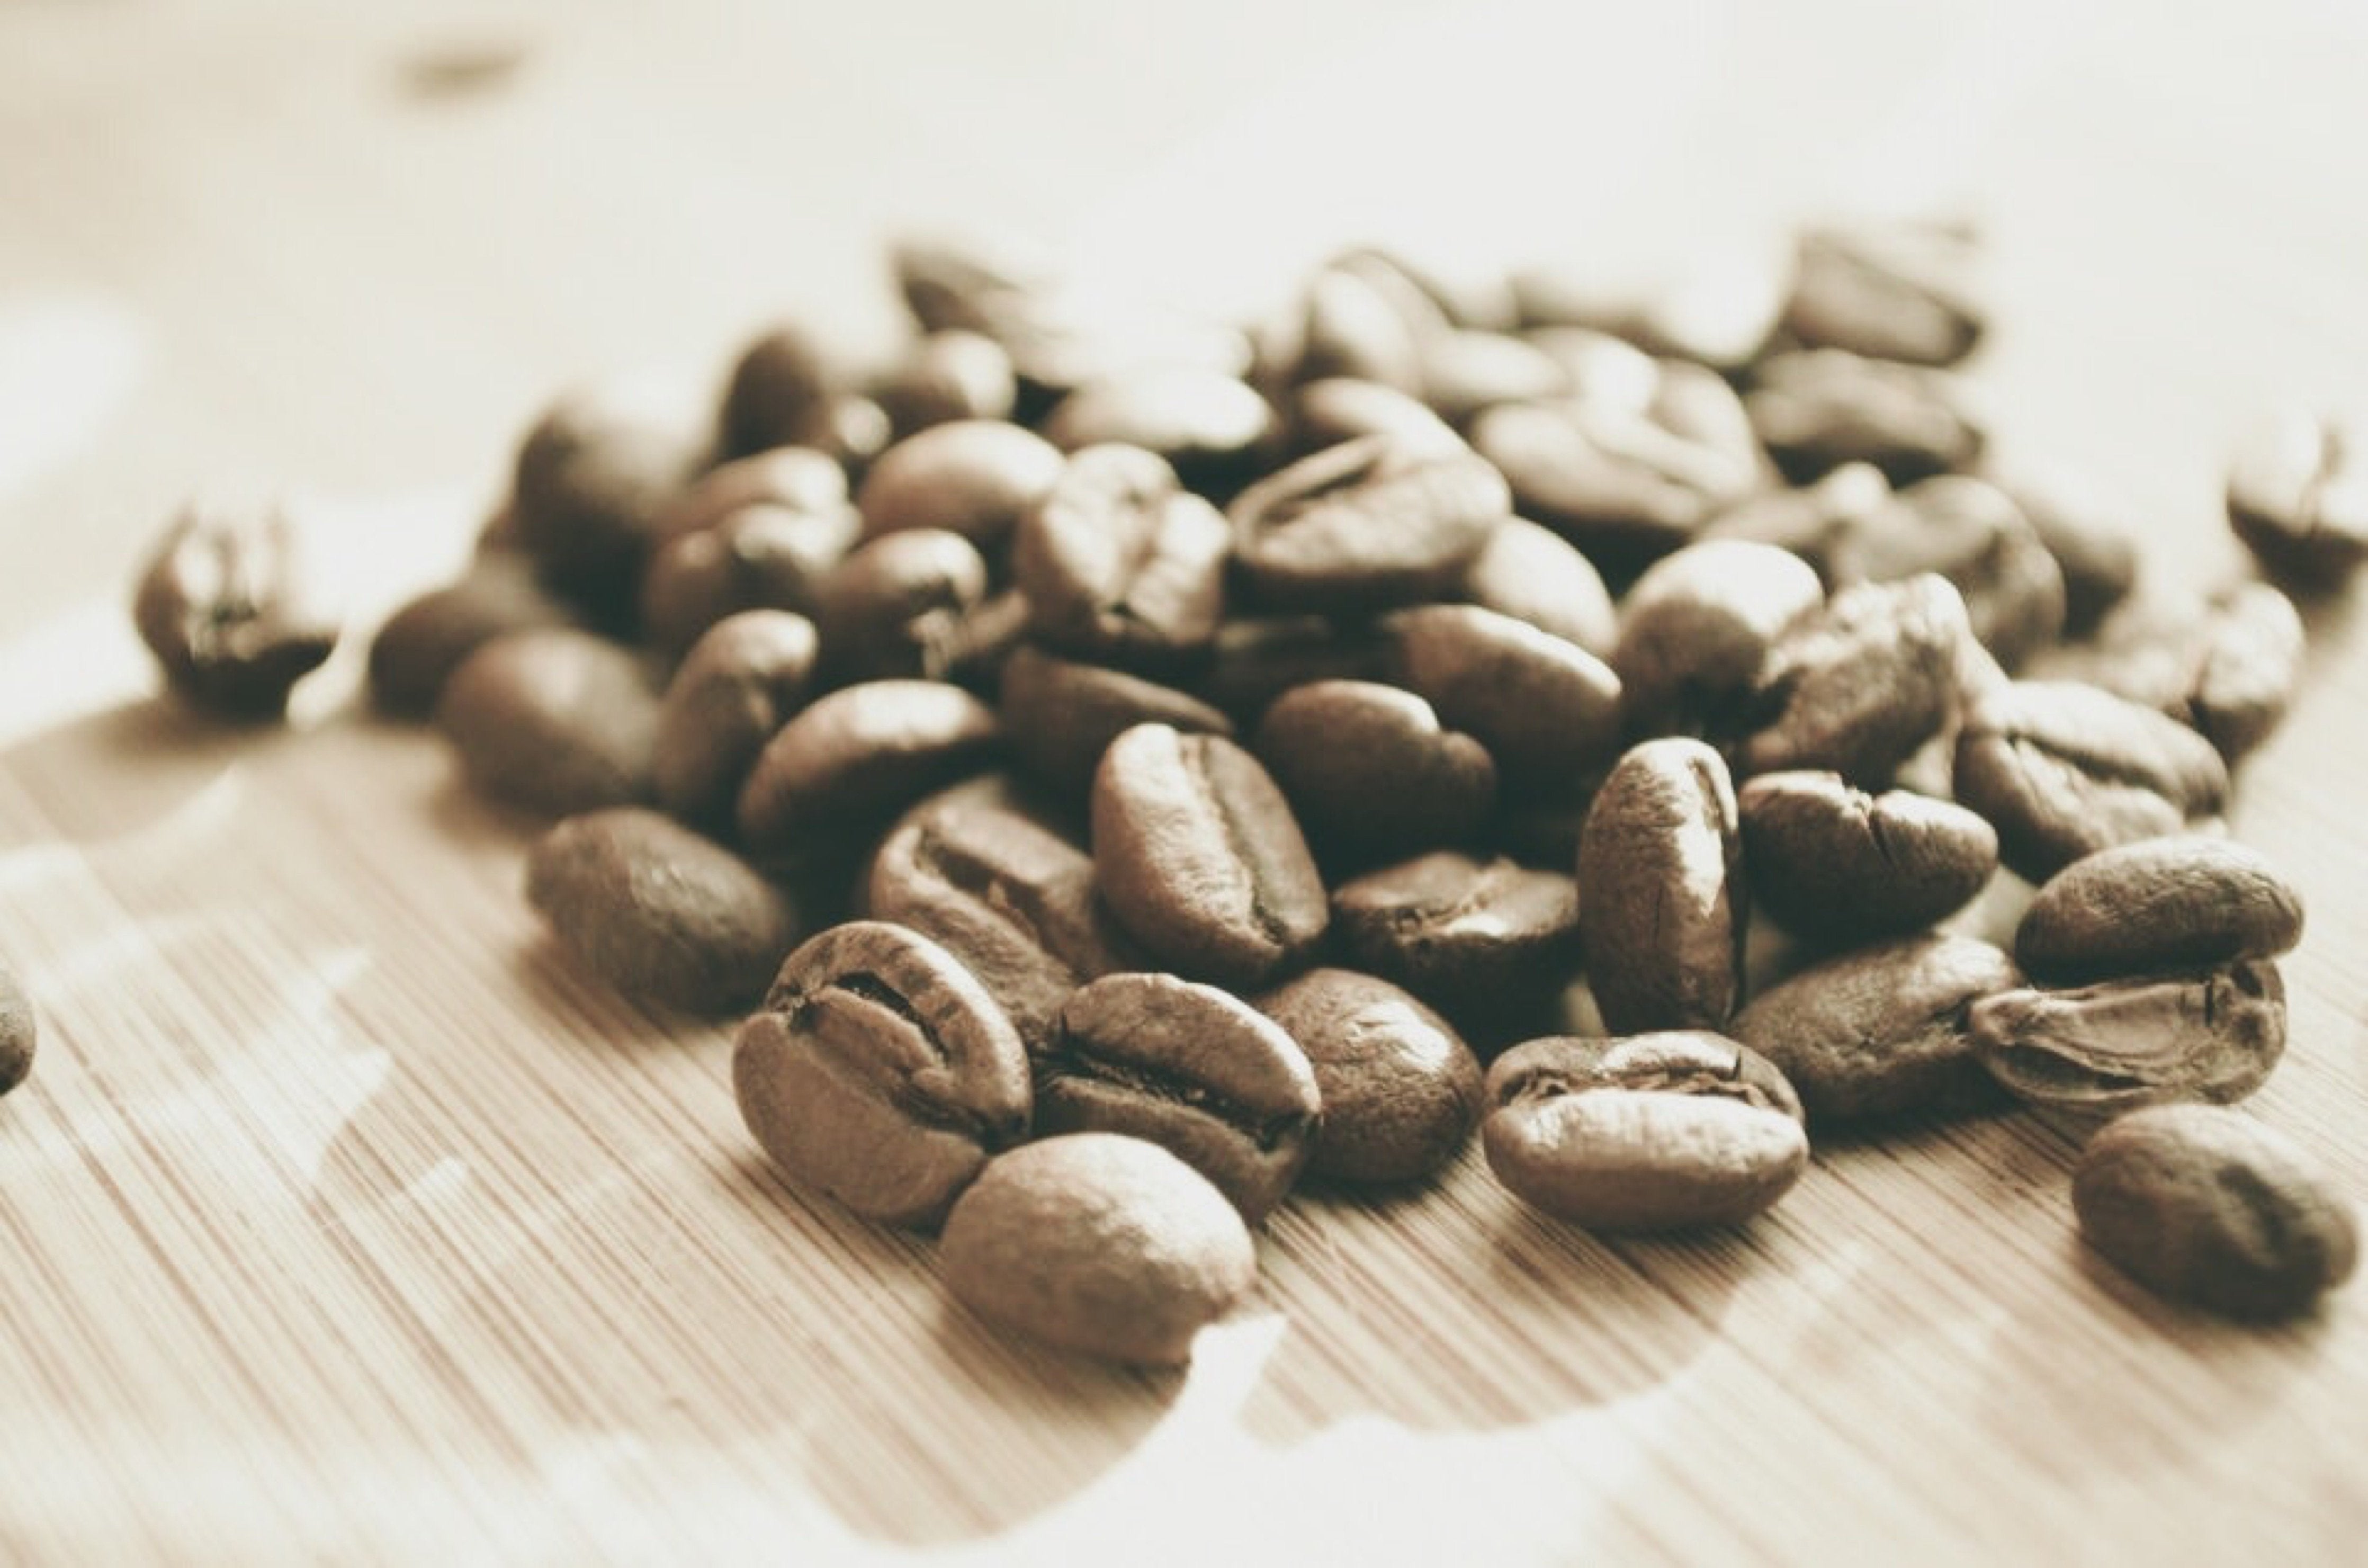 Lightly roasted specialty coffee beans laying on a table.